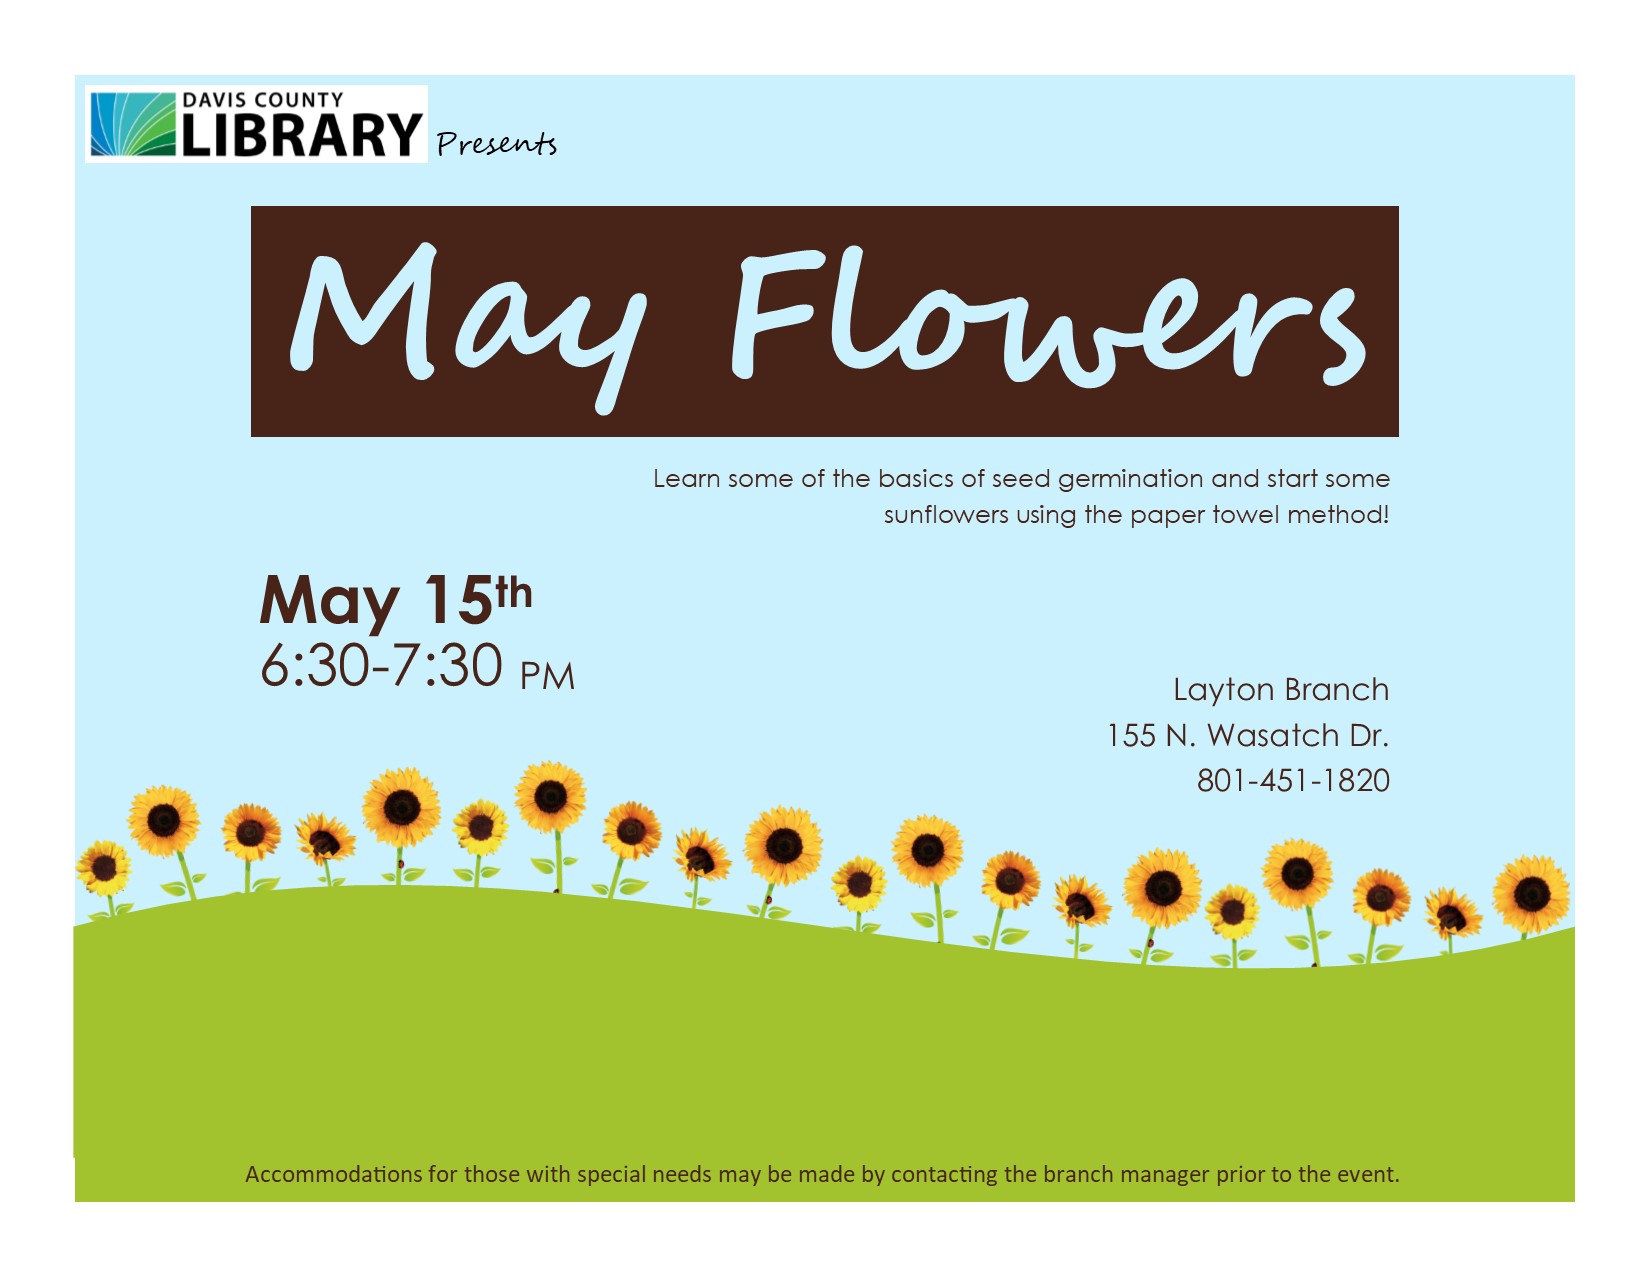 May Flowers - come learn about seeds and plant some of your own using a paper towel.  Monday, May 16 at 6:30 pm at the Layton Branch Library